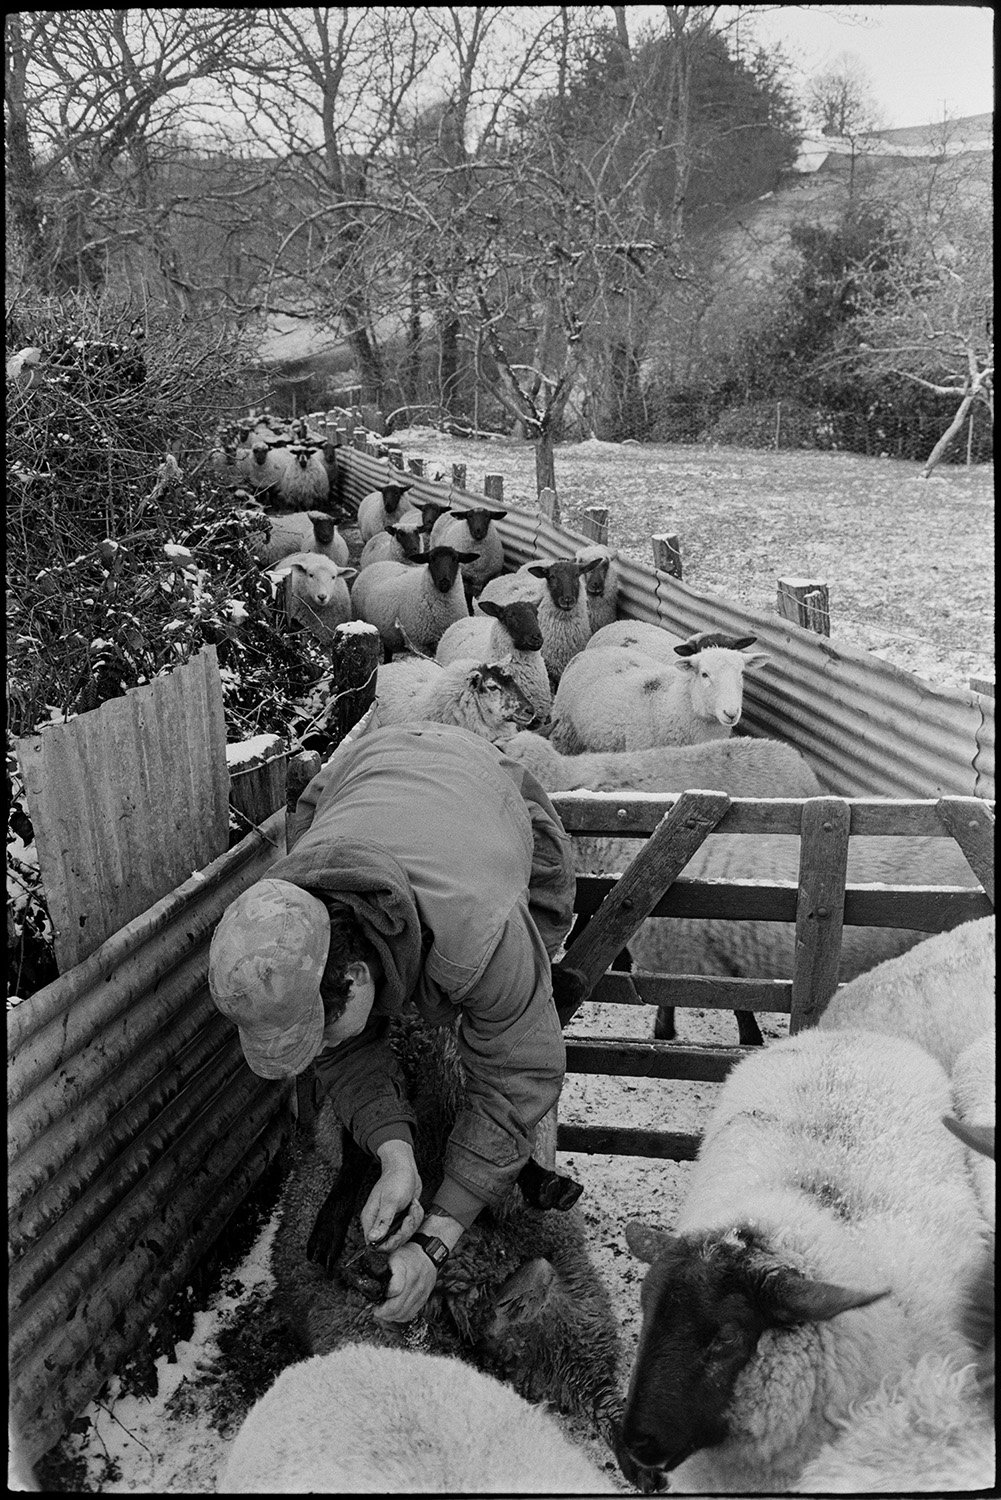 Snow. Farmer inspecting sheep in pen, clipping feet and drenching, syringe and ointment.
[A man inspecting sheep, and trimming a sheep's hoof, at Westpark Farm, Iddesleigh. Sheep are waiting to be inspected in a holding pen made of corrugated iron sheets at the edge of a field lightly covered in snow. Trees are visible in the background.]